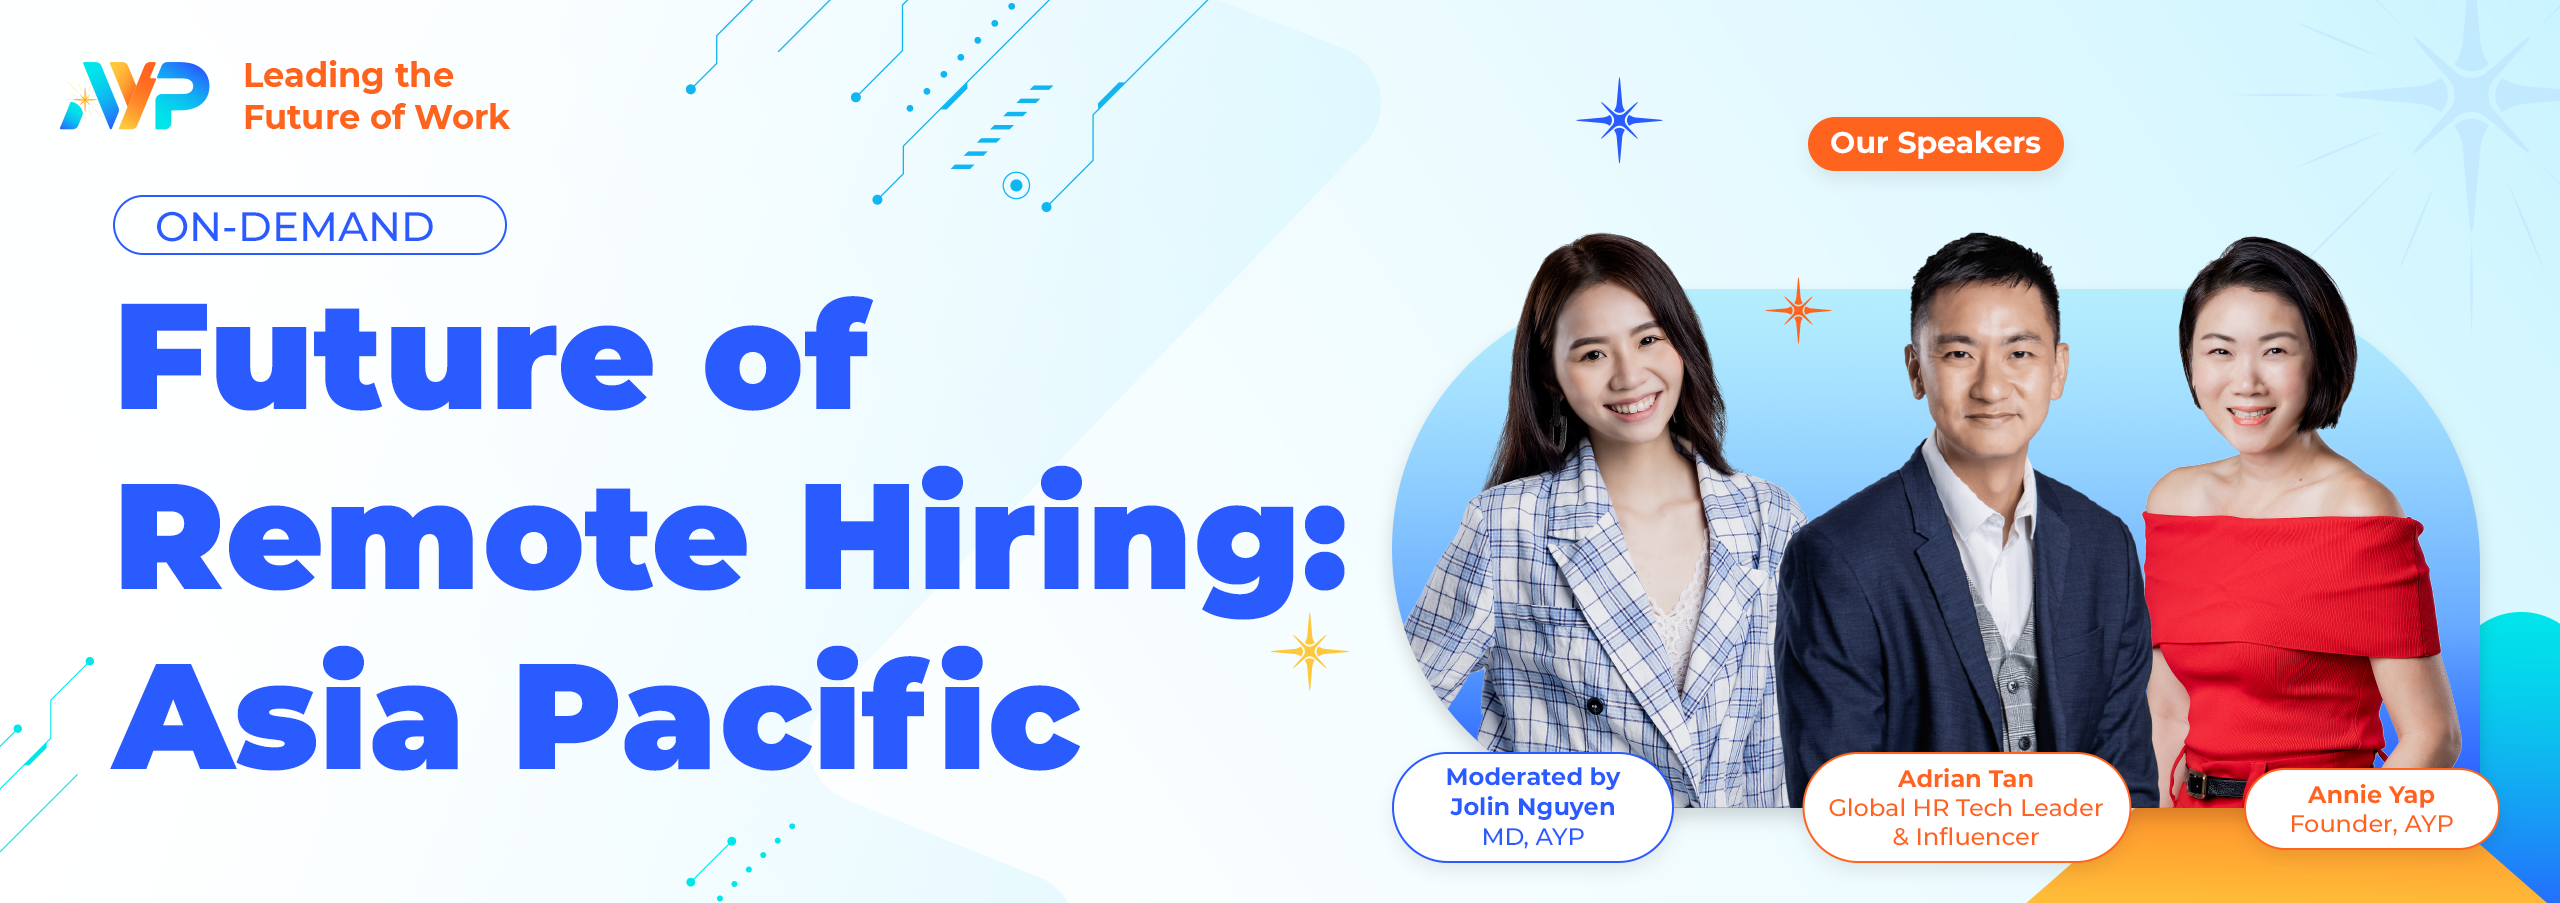 Future-Of-Remote-Hiring-Asia-Pacific-AYP-2